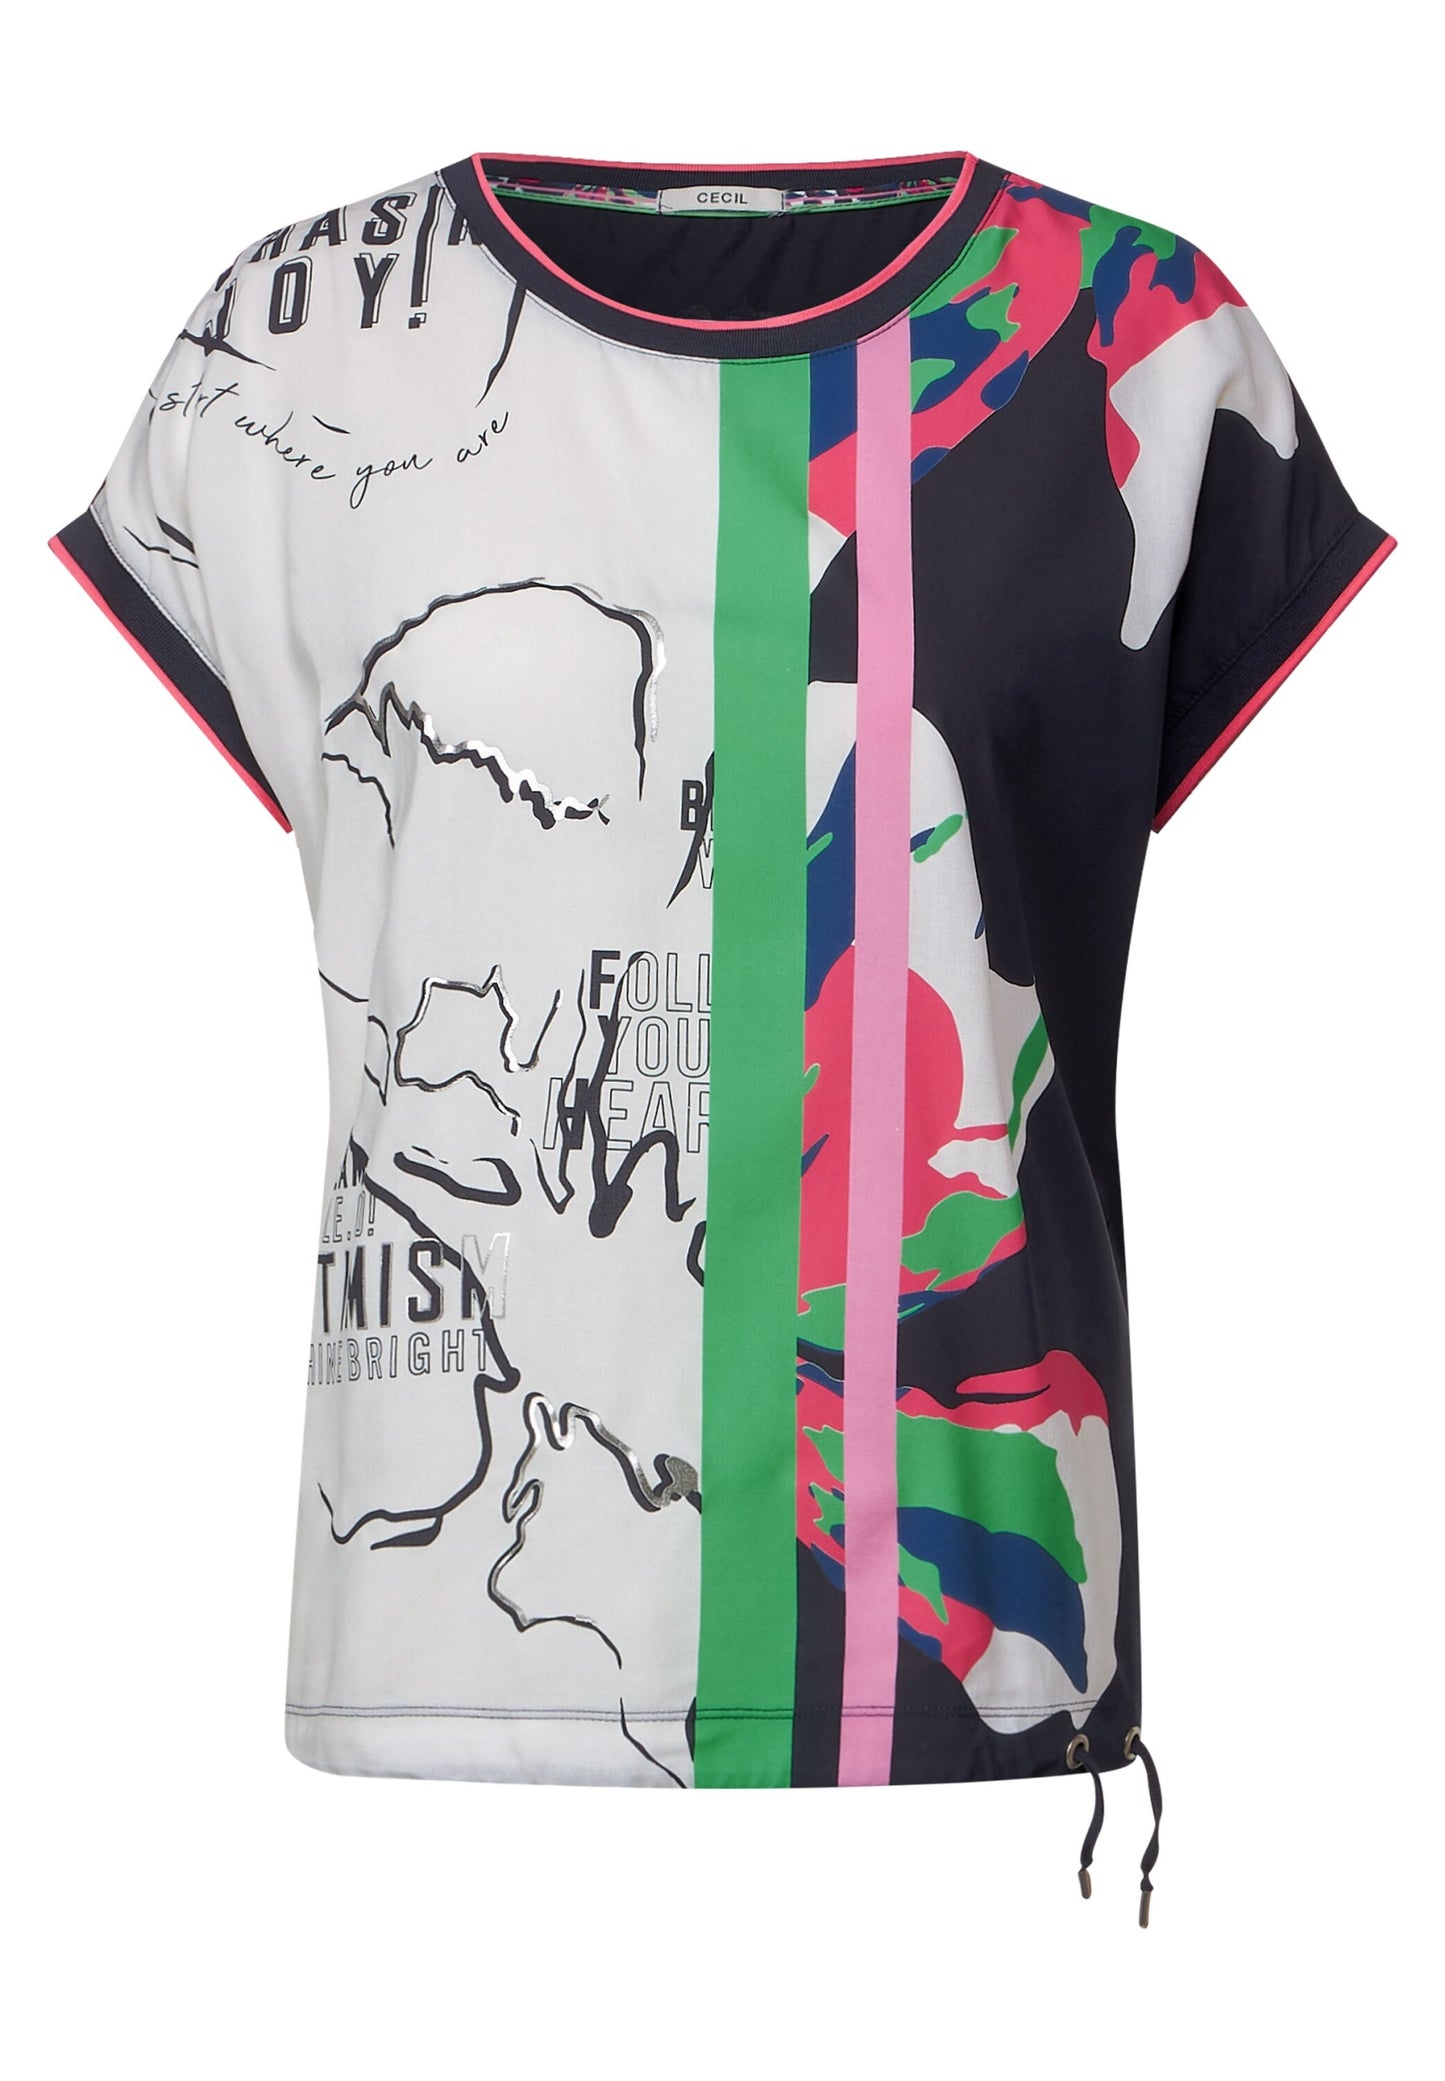 Matmix shirt with printed colo